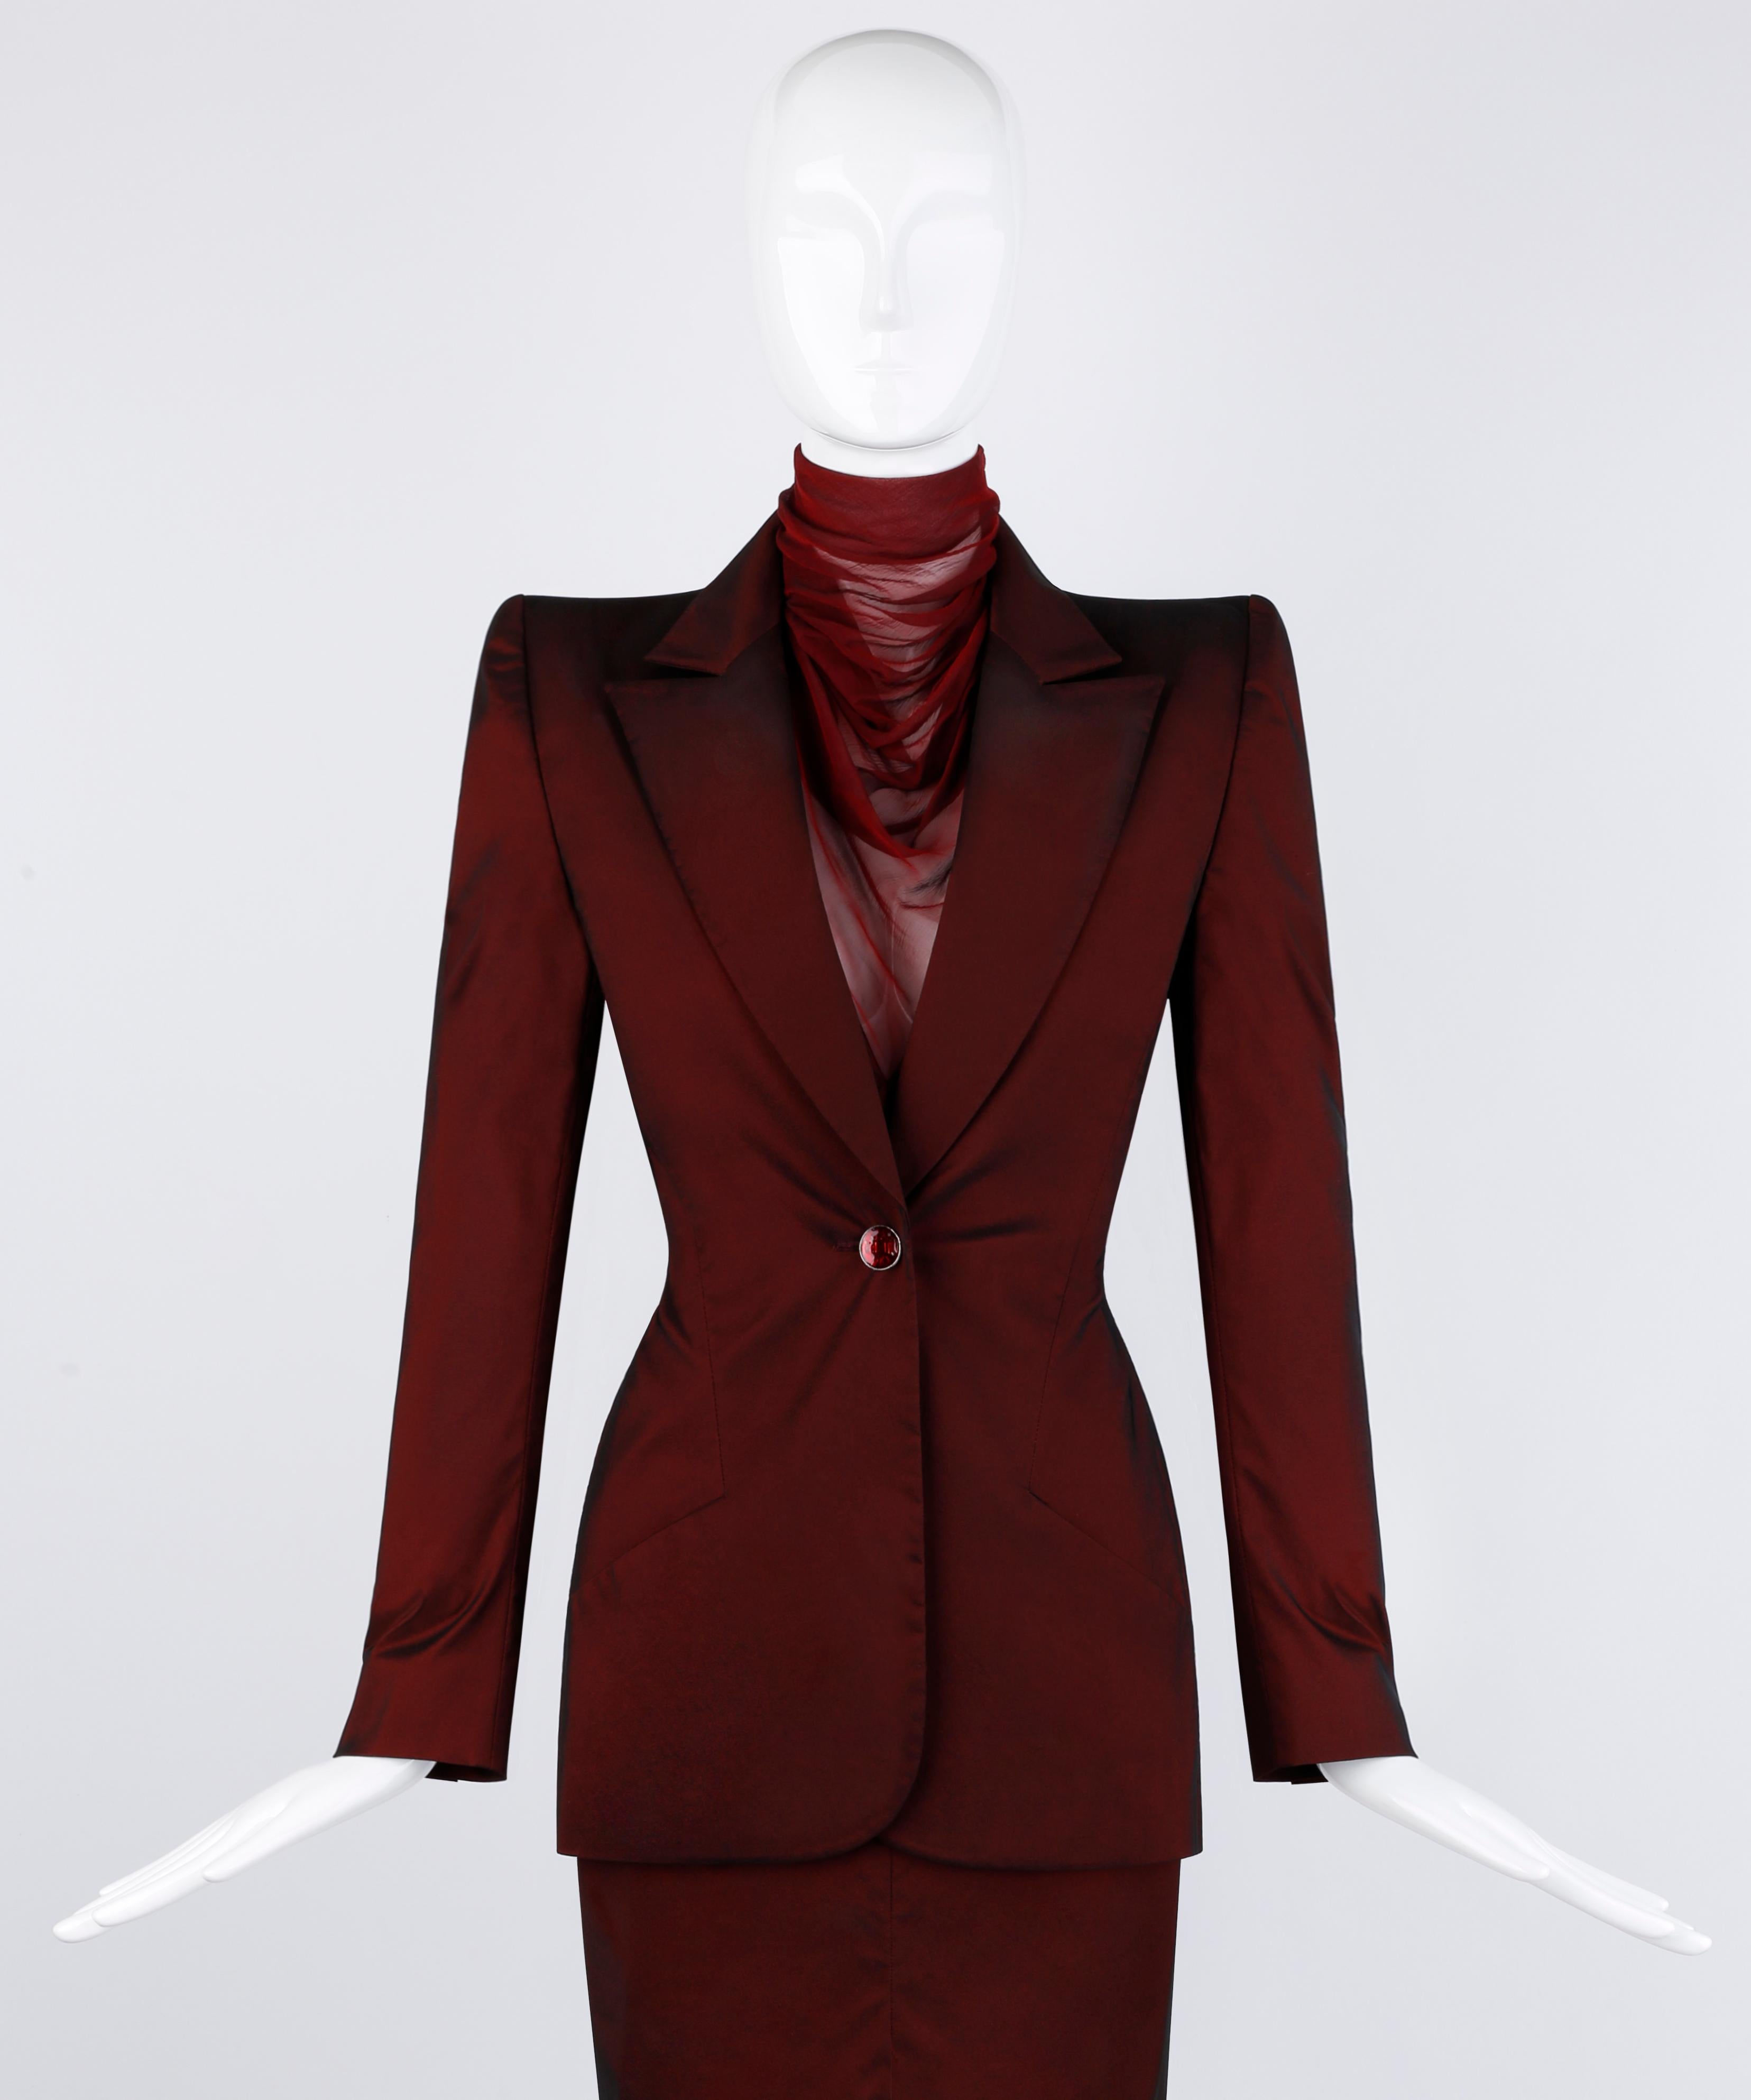 Givenchy Couture Alexander McQueen F/W 1998 Sheer Mock Neck Dress & Blazer Suit For Sale 5